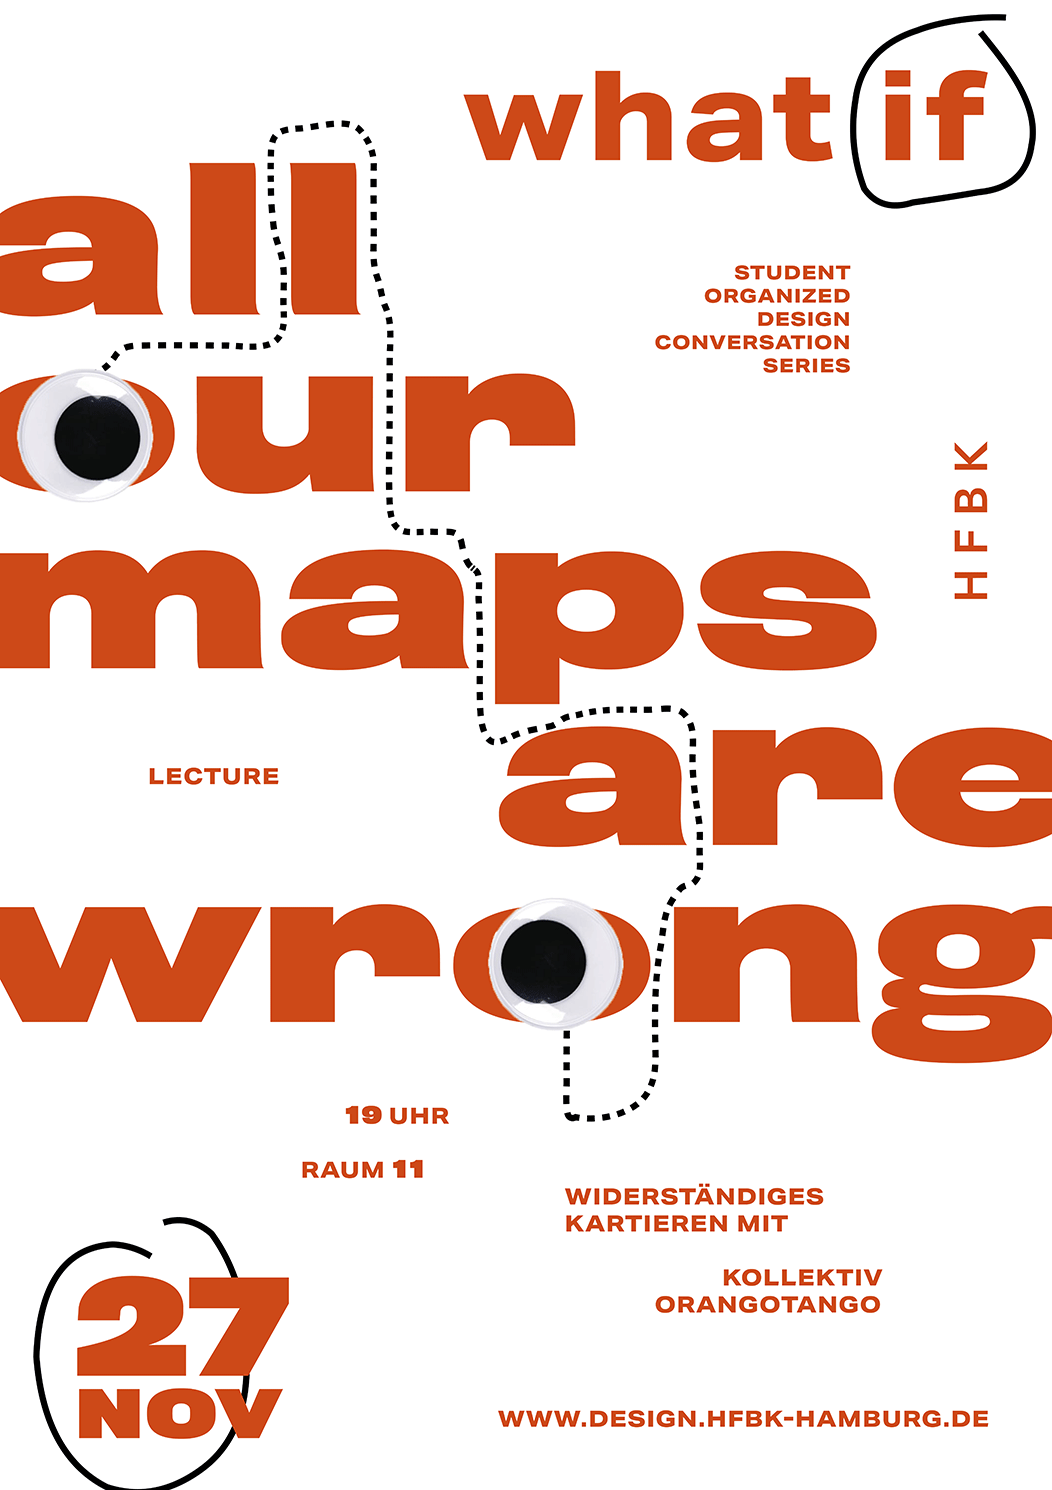 ... all our maps are wrong